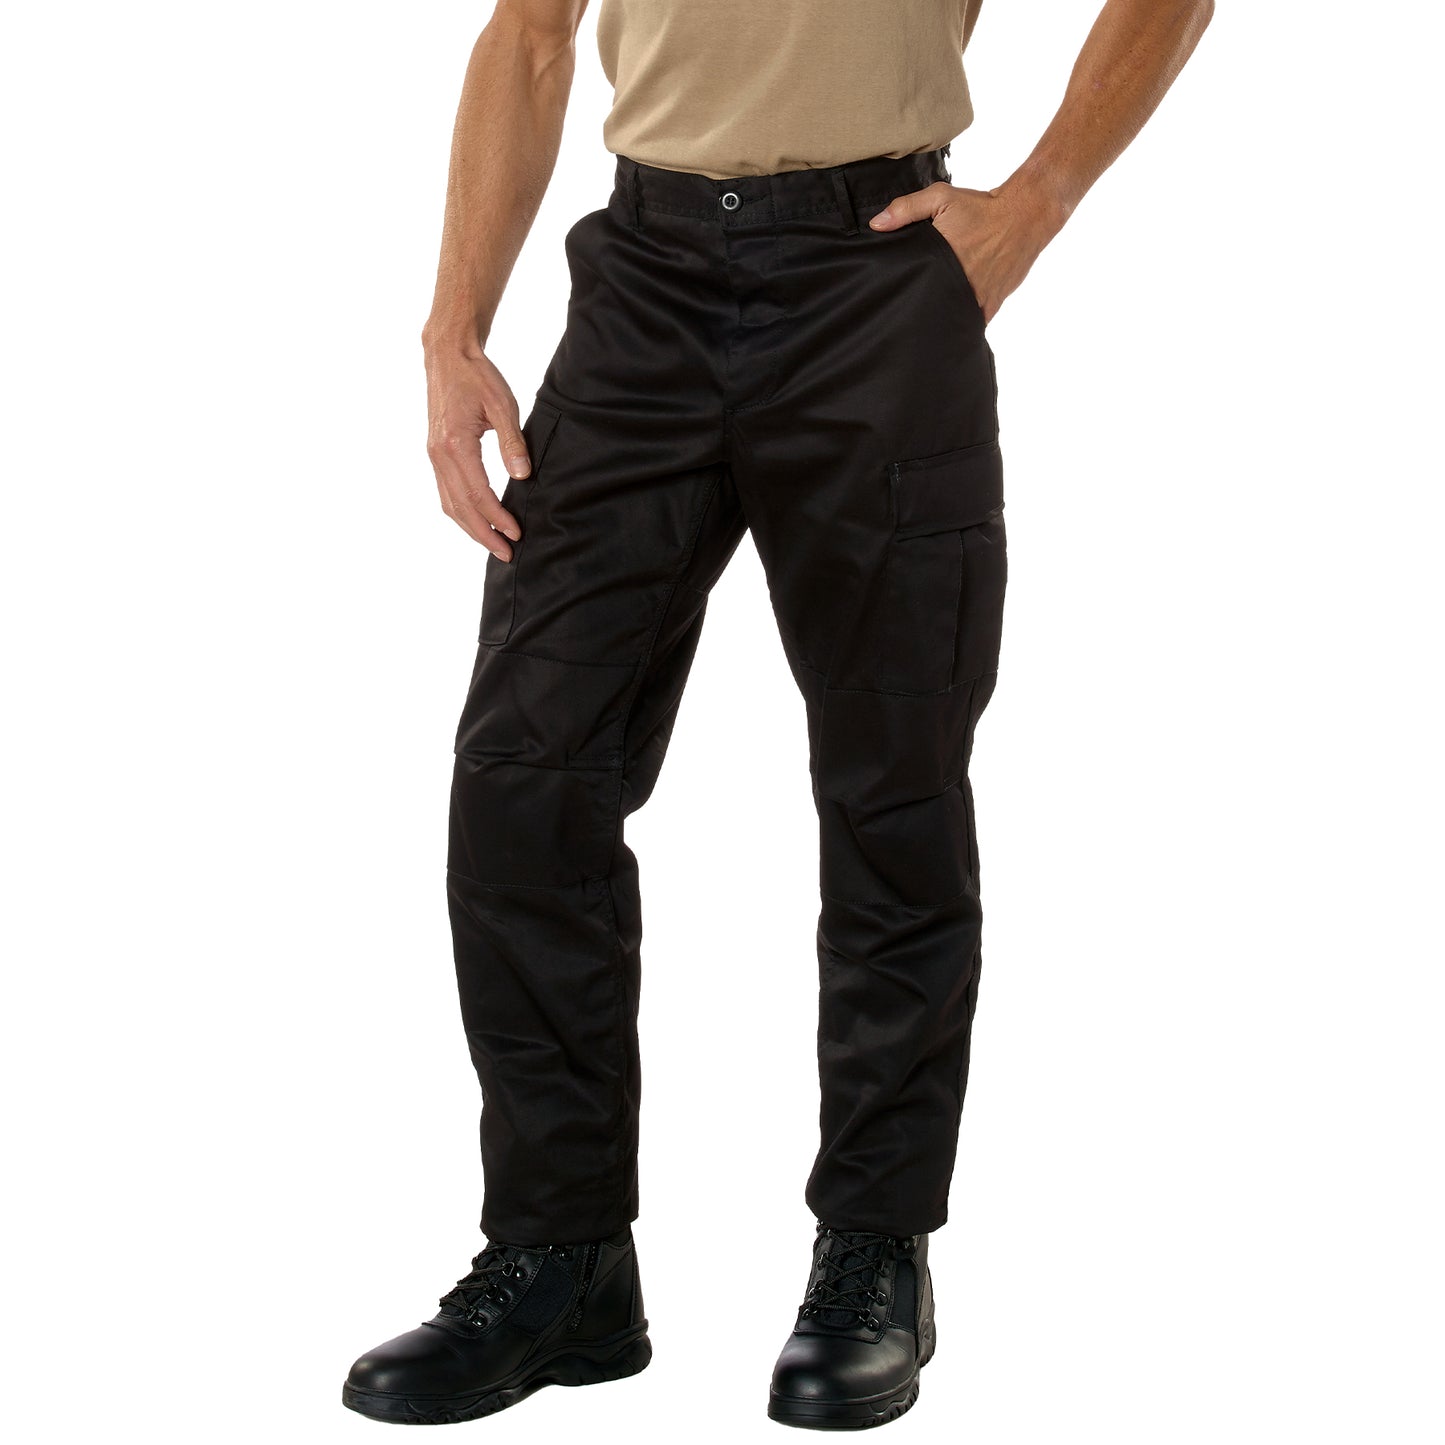 Relaxed Fit BDU Cargo Pants Black & Camouflage Zip Fly Mens Camo